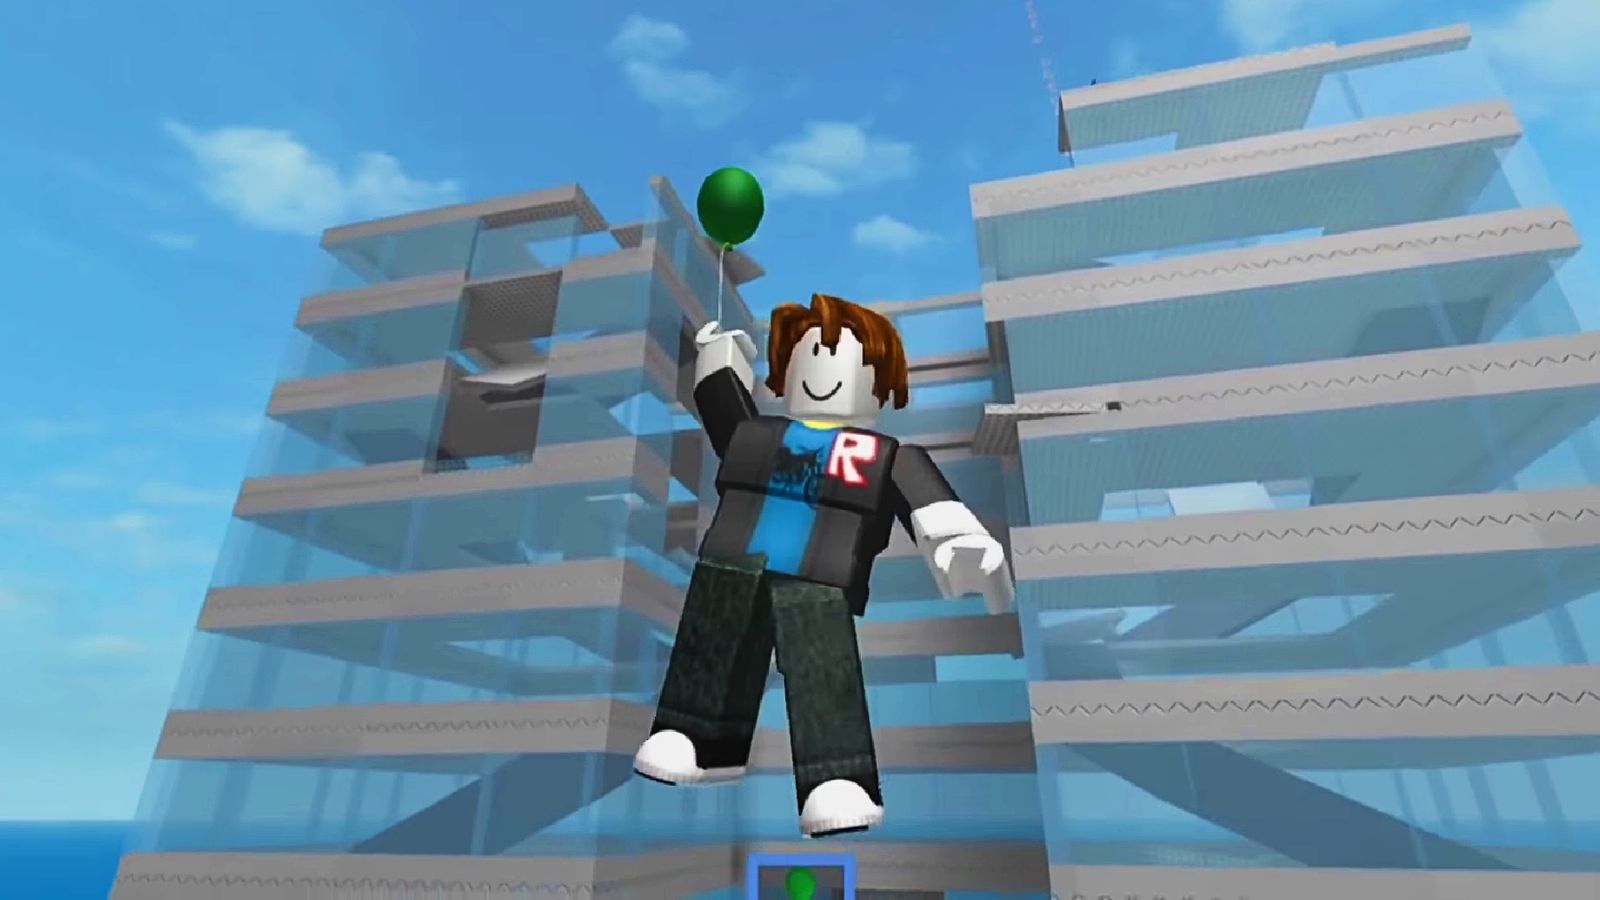 Roblox man flying with a green balloon in his left hand